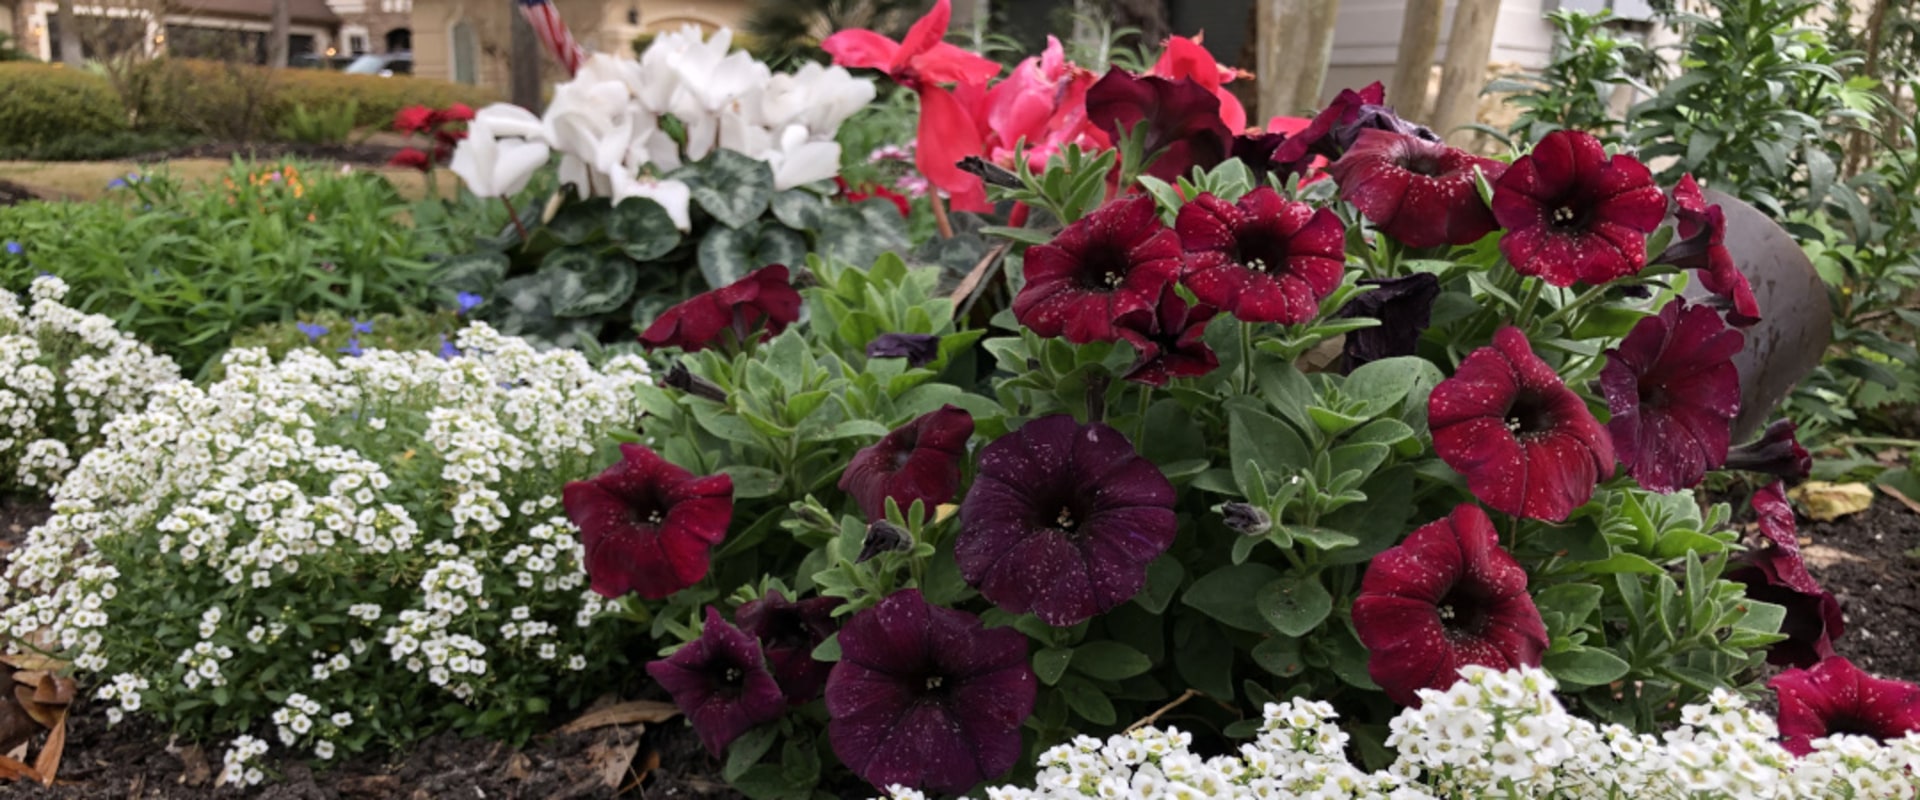 Gardening in Conroe, Texas: The Best Plants to Grow